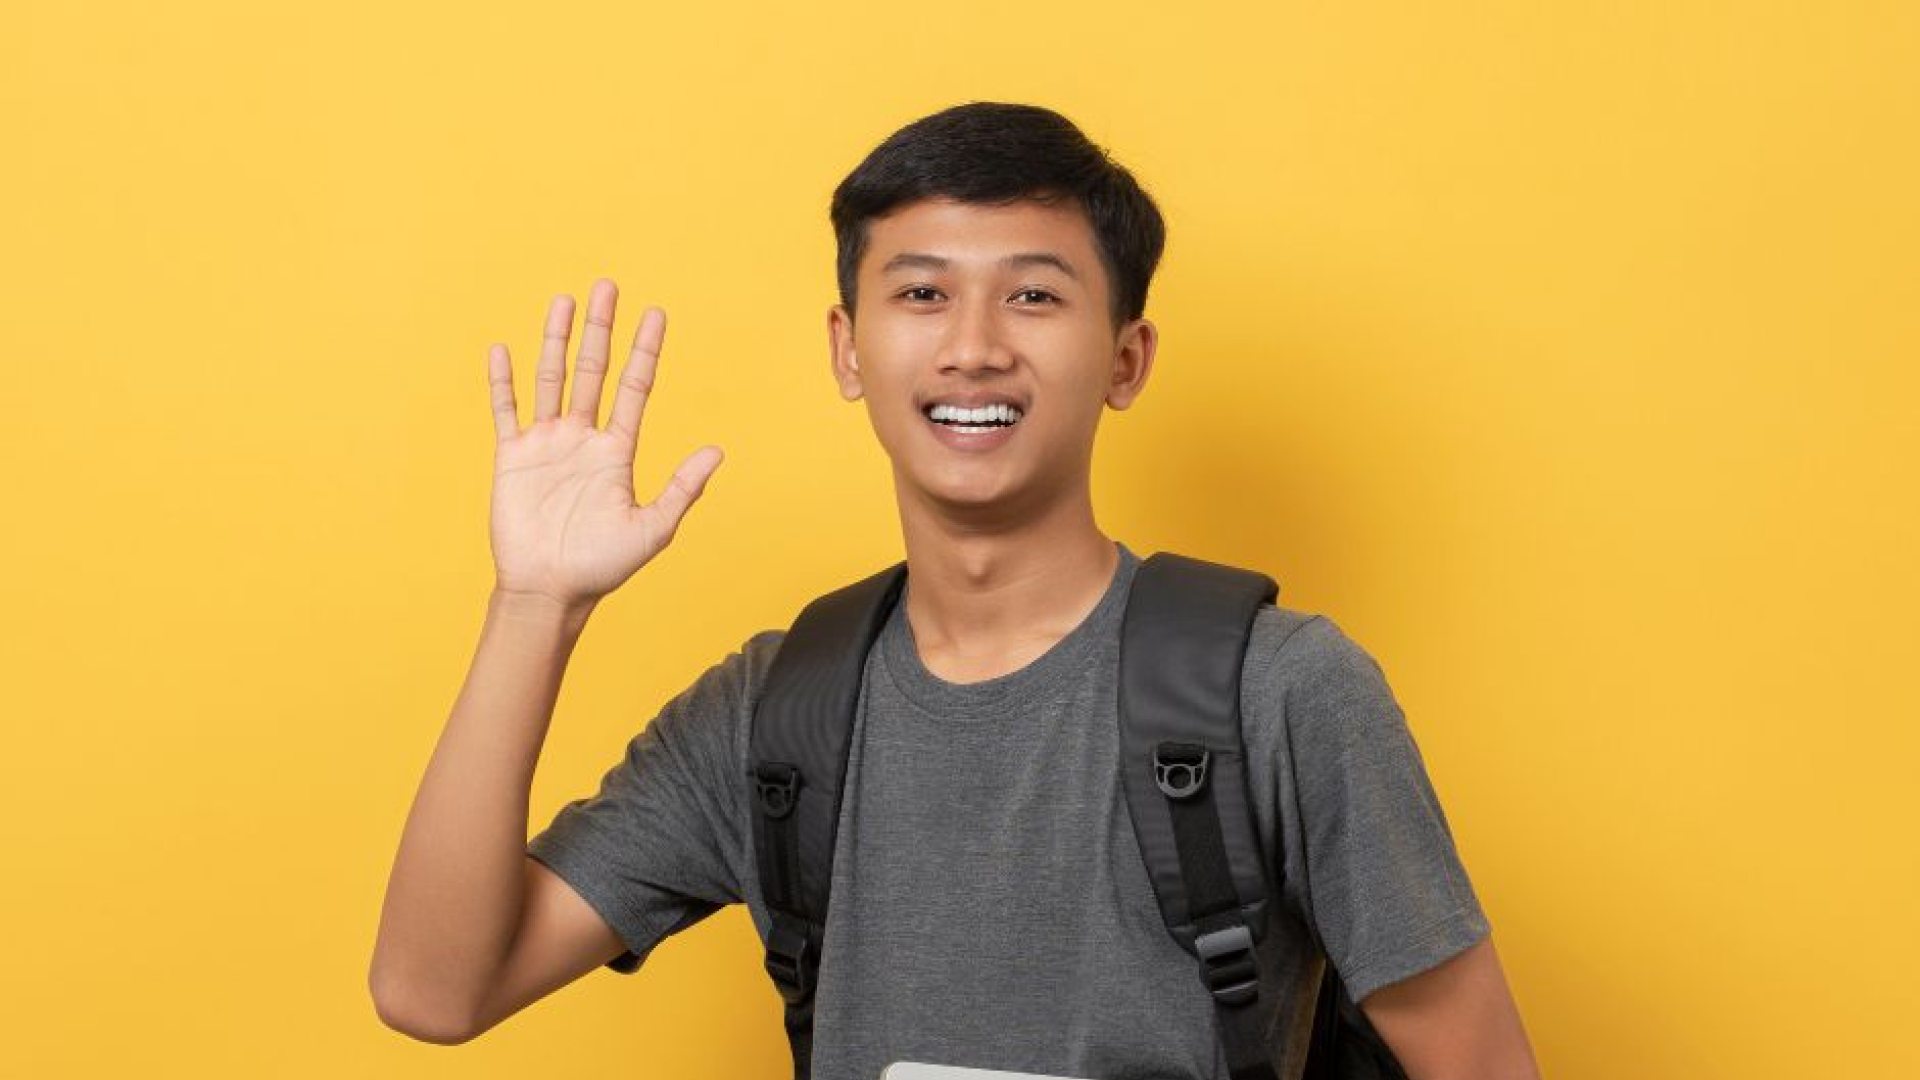 Student waving while holding books